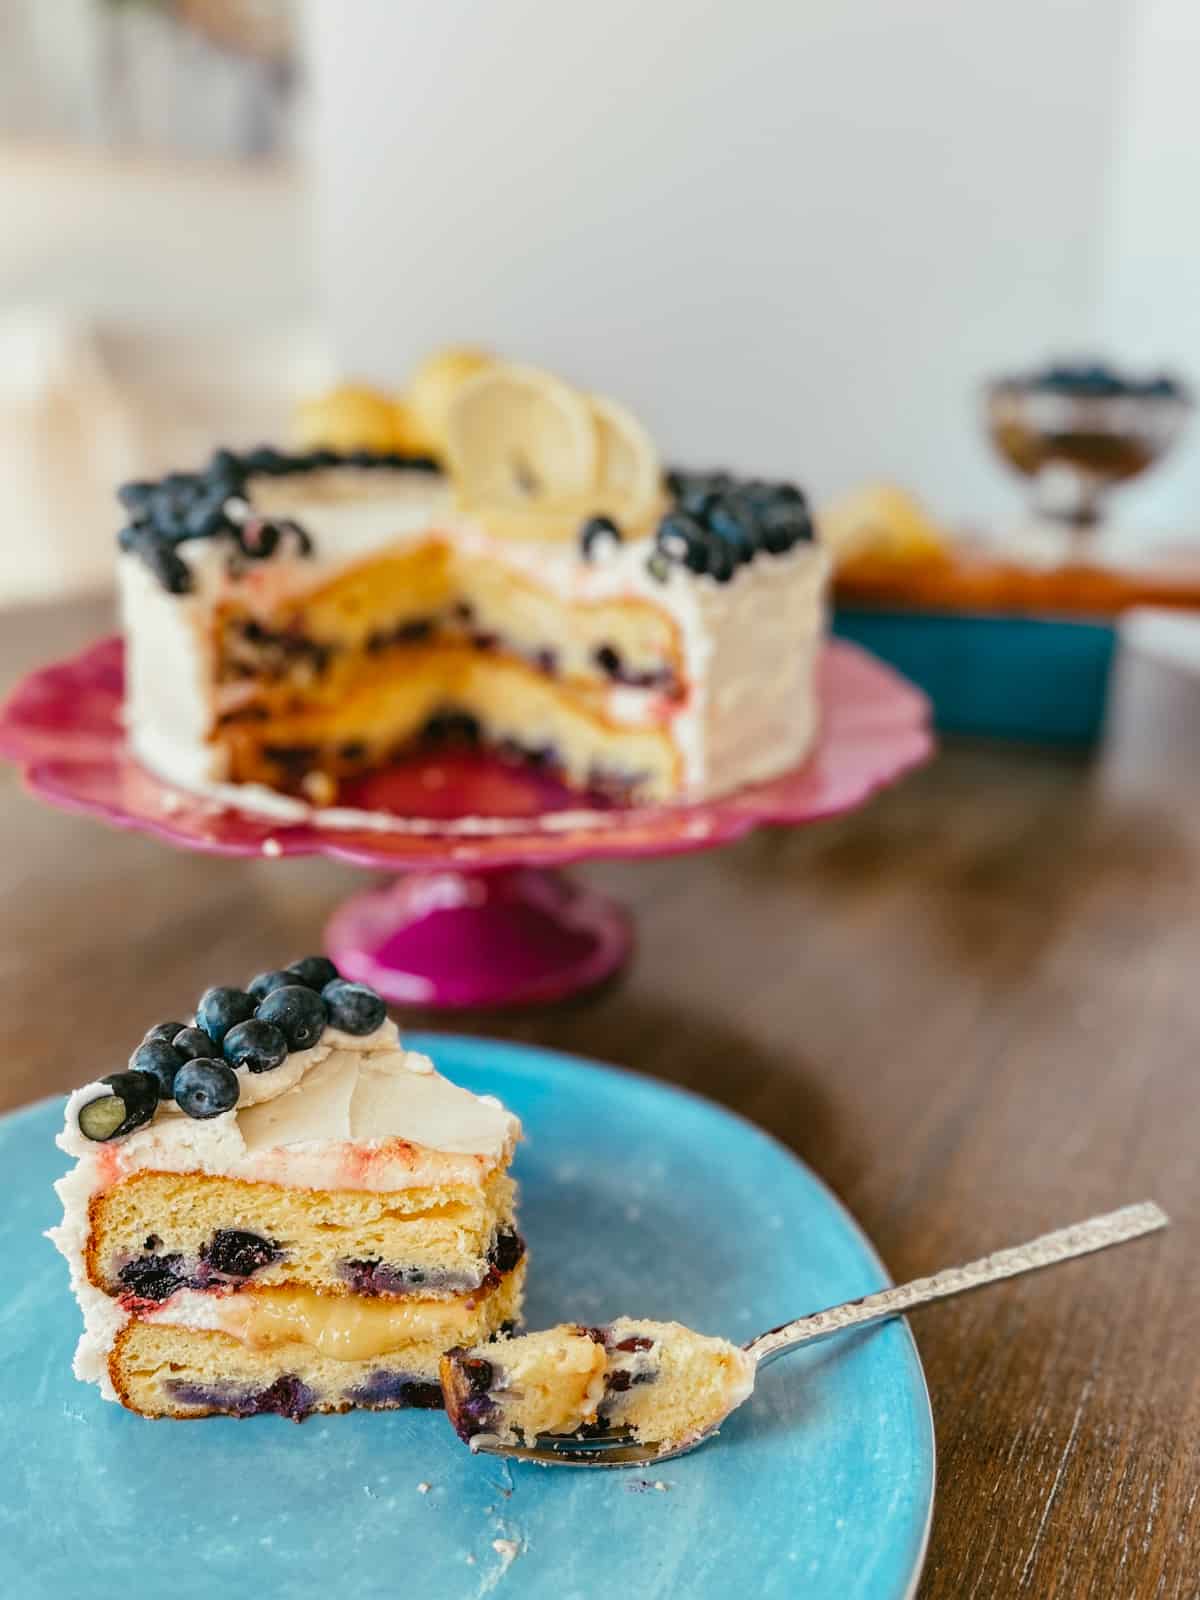 Slice of layered cake with blueberries on a plate and a cake on a pink cake stand